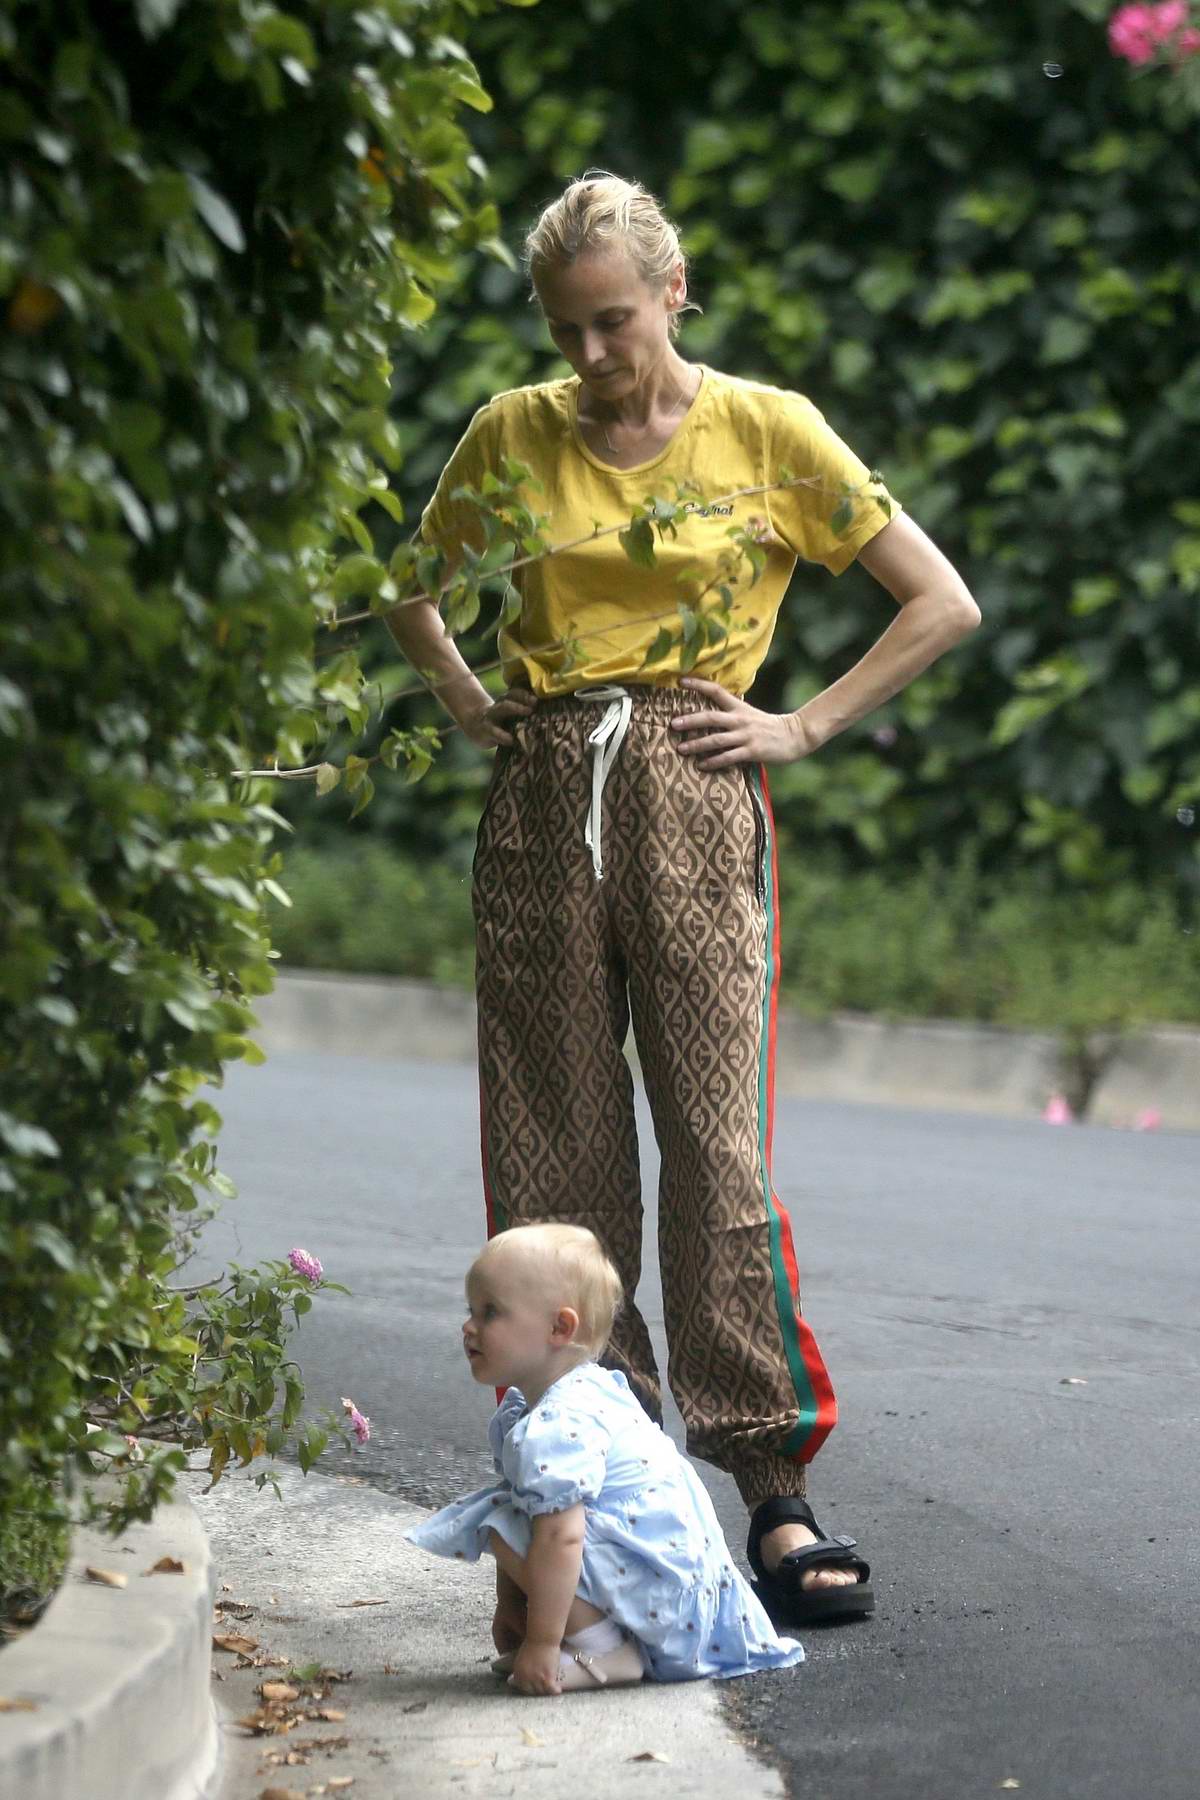 Diane Kruger beams at her daughter Nova, four, after she gives money to a  homeless person while out and about in Manhattan